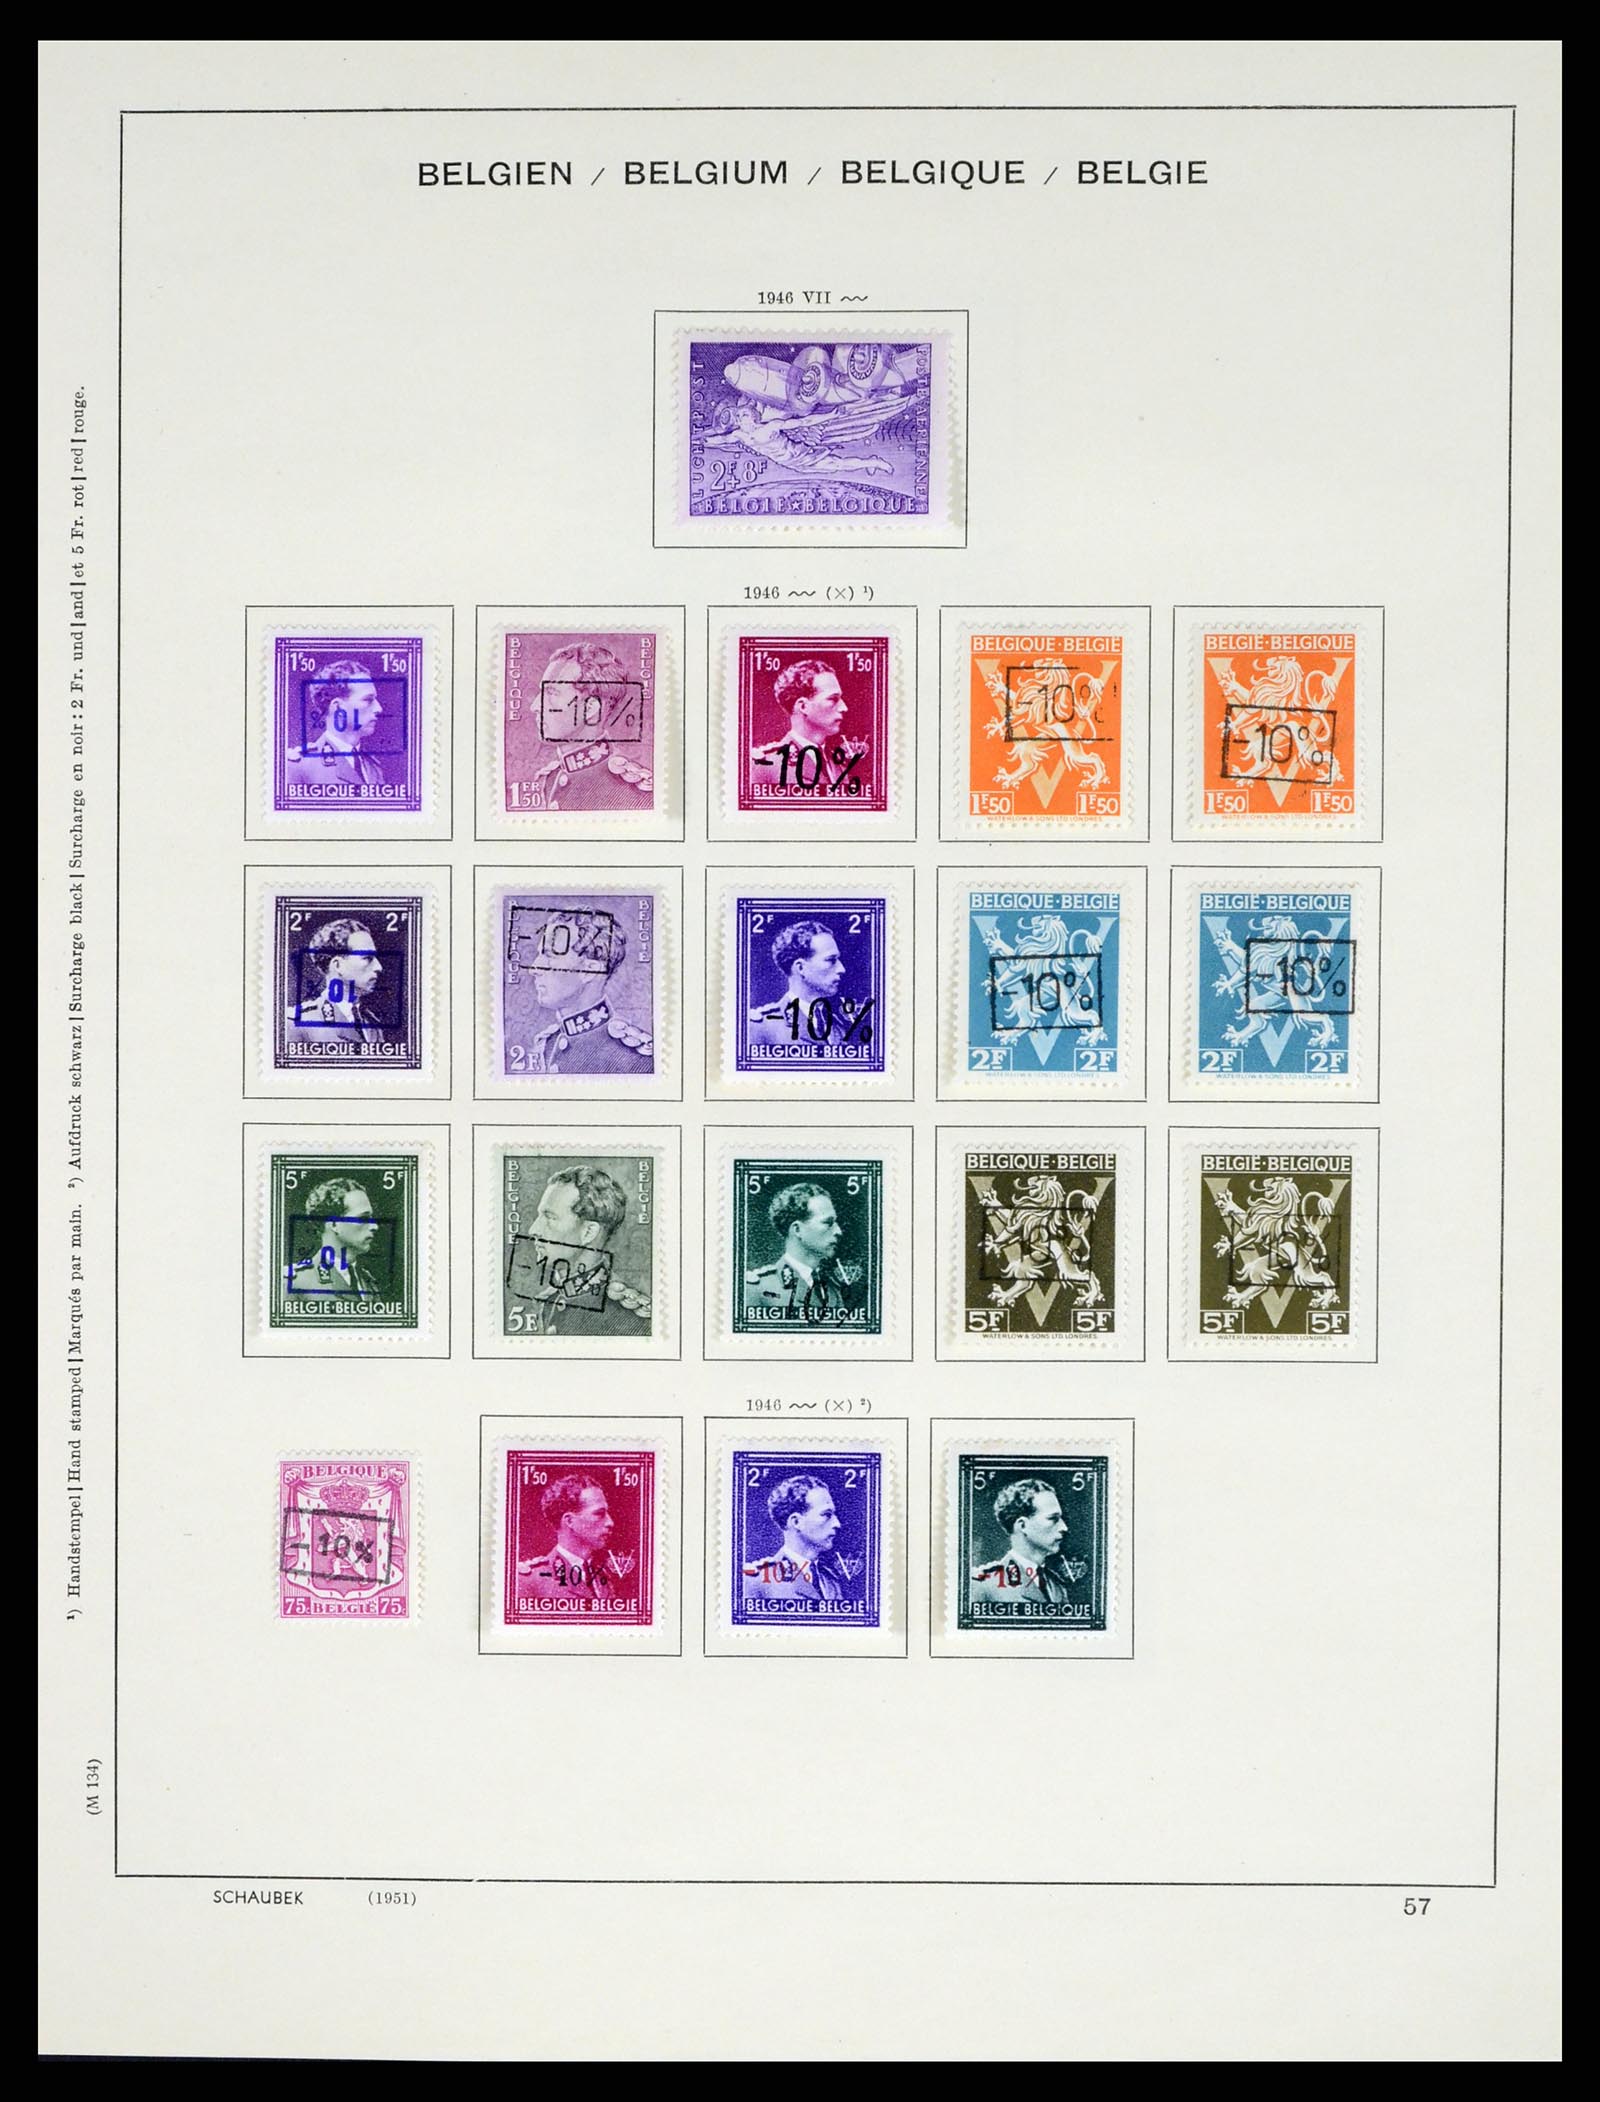 37595 064 - Stamp collection 37595 Super collection Belgium 1849-2015!